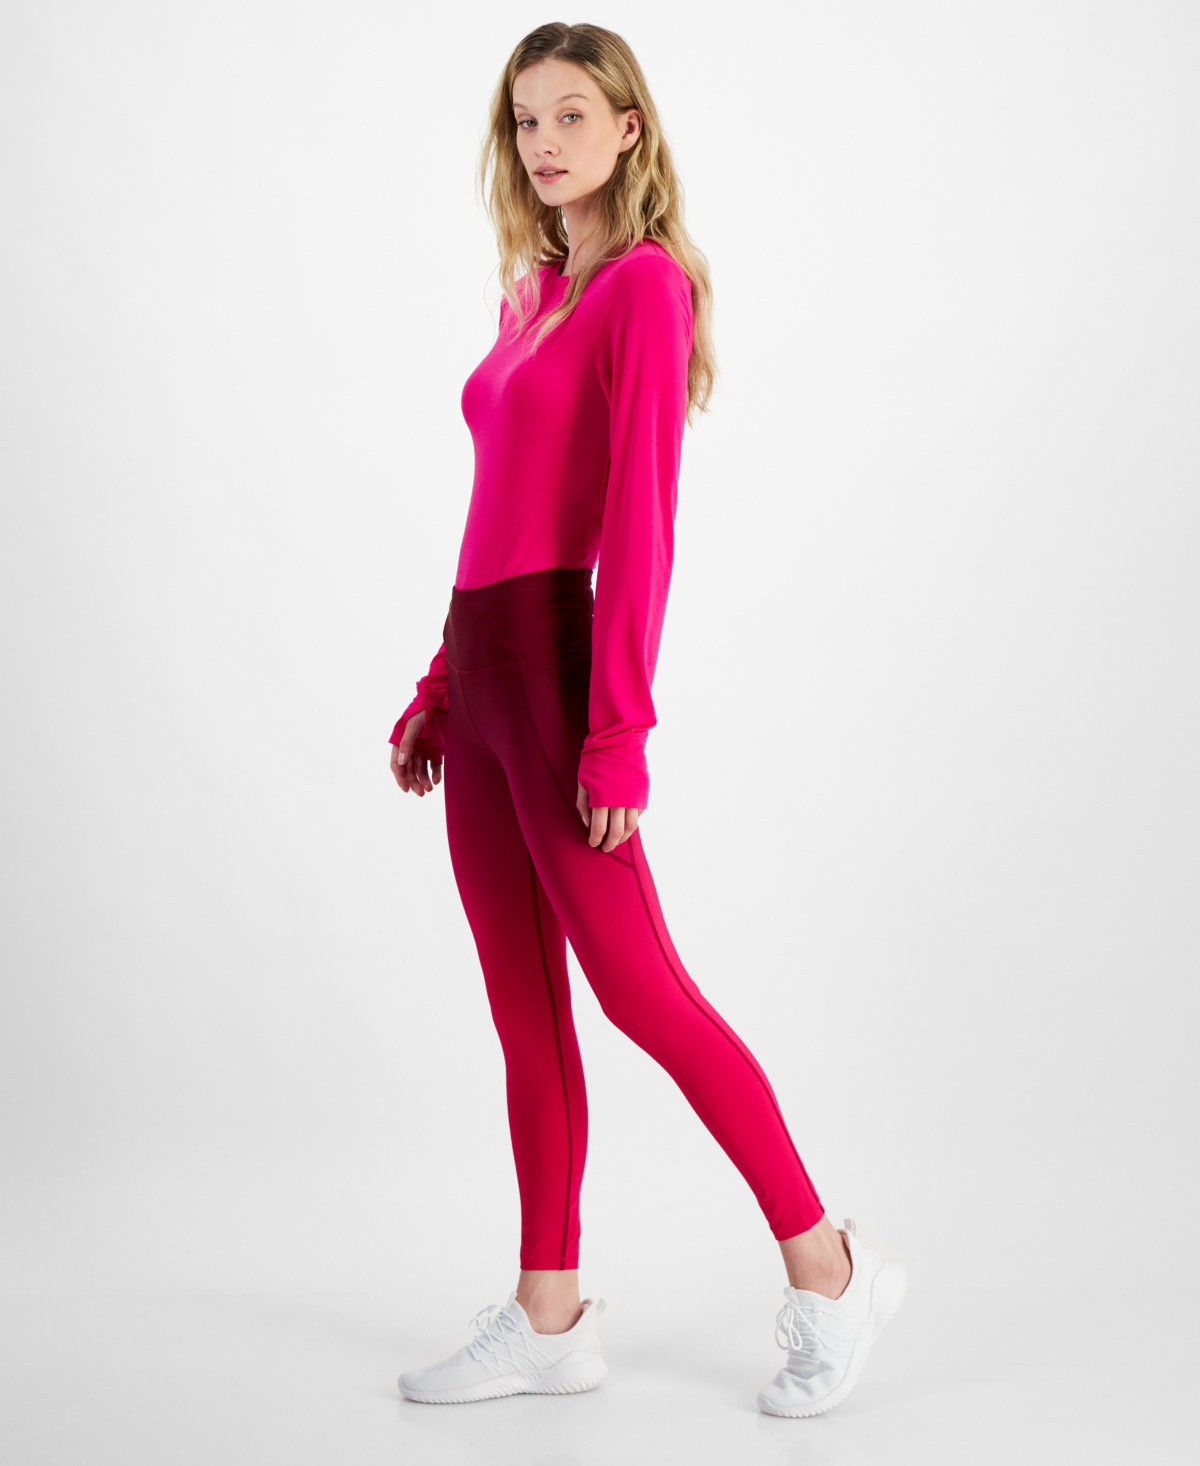 Women's Ombre 7/8 Compression Leggings, Created for Macy's - Pink Dragon